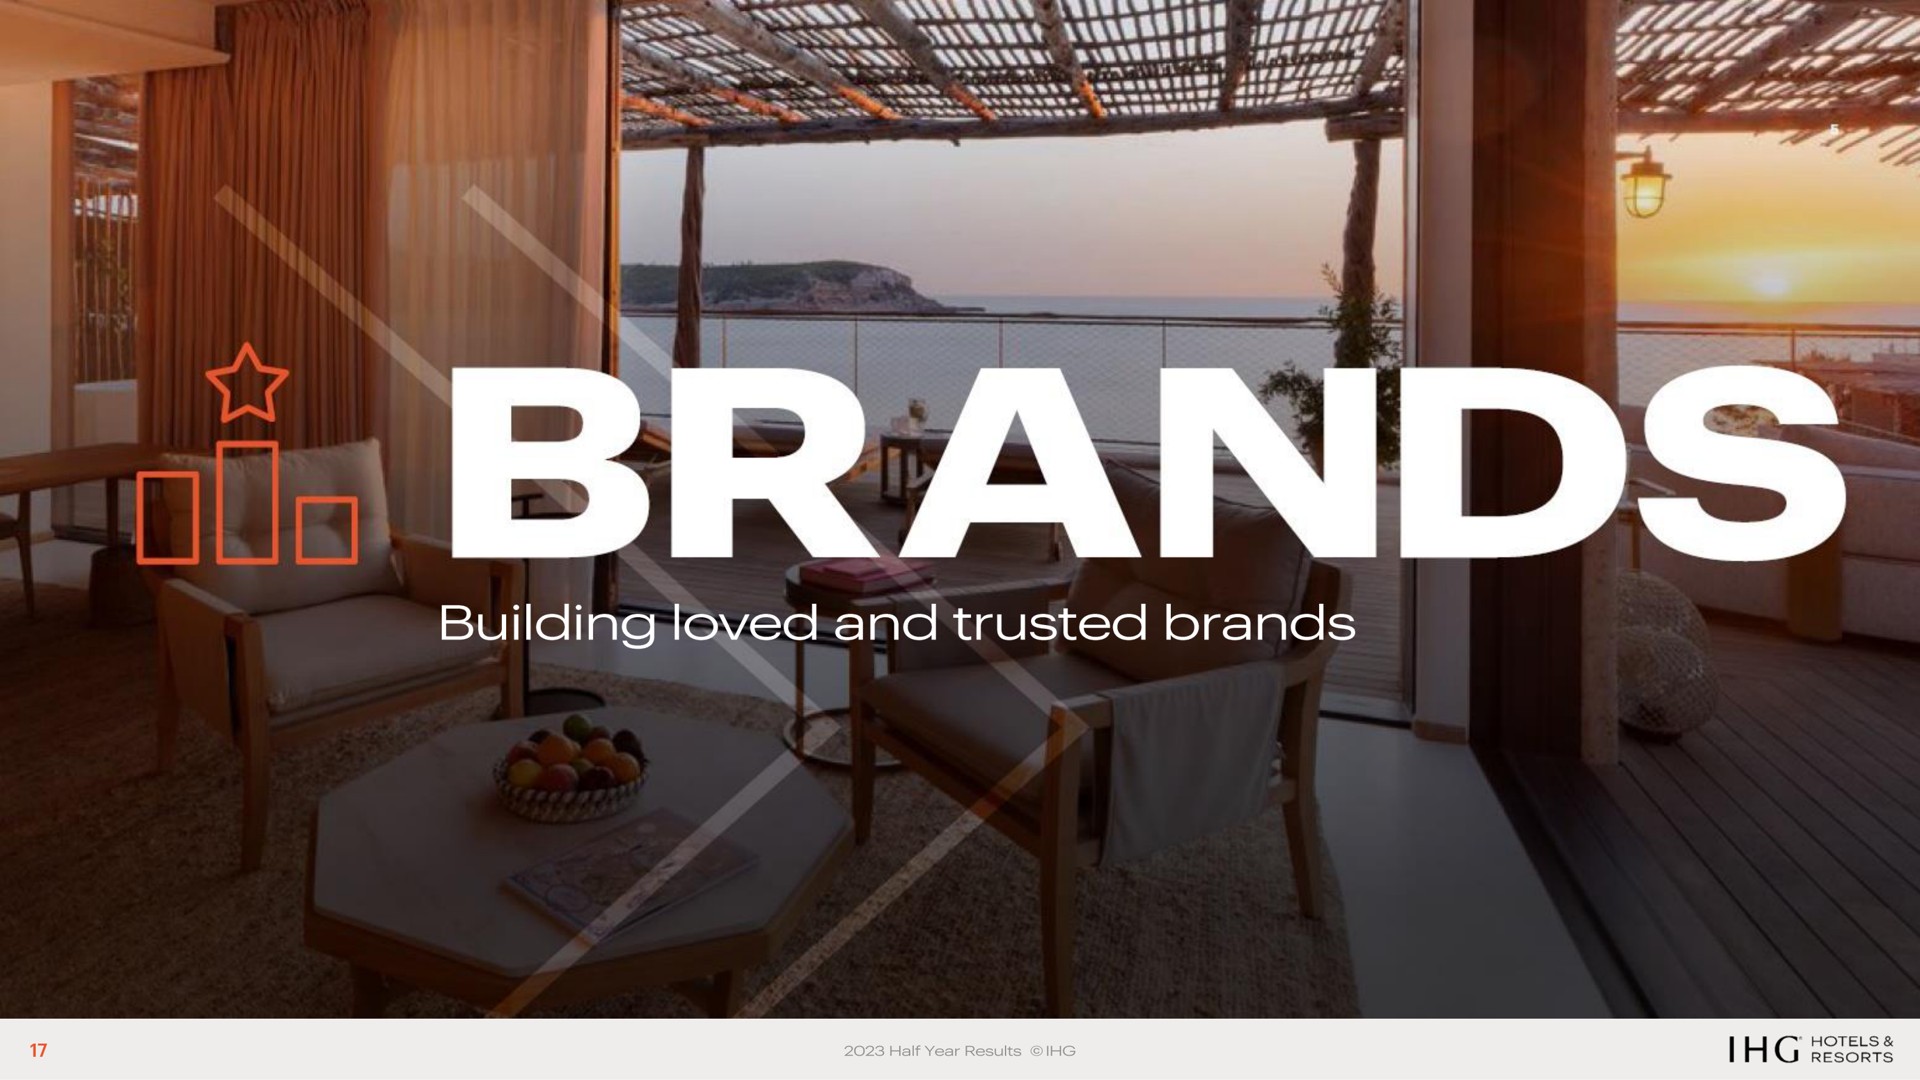 no eas me building loved and trusted brands | IHG Hotels